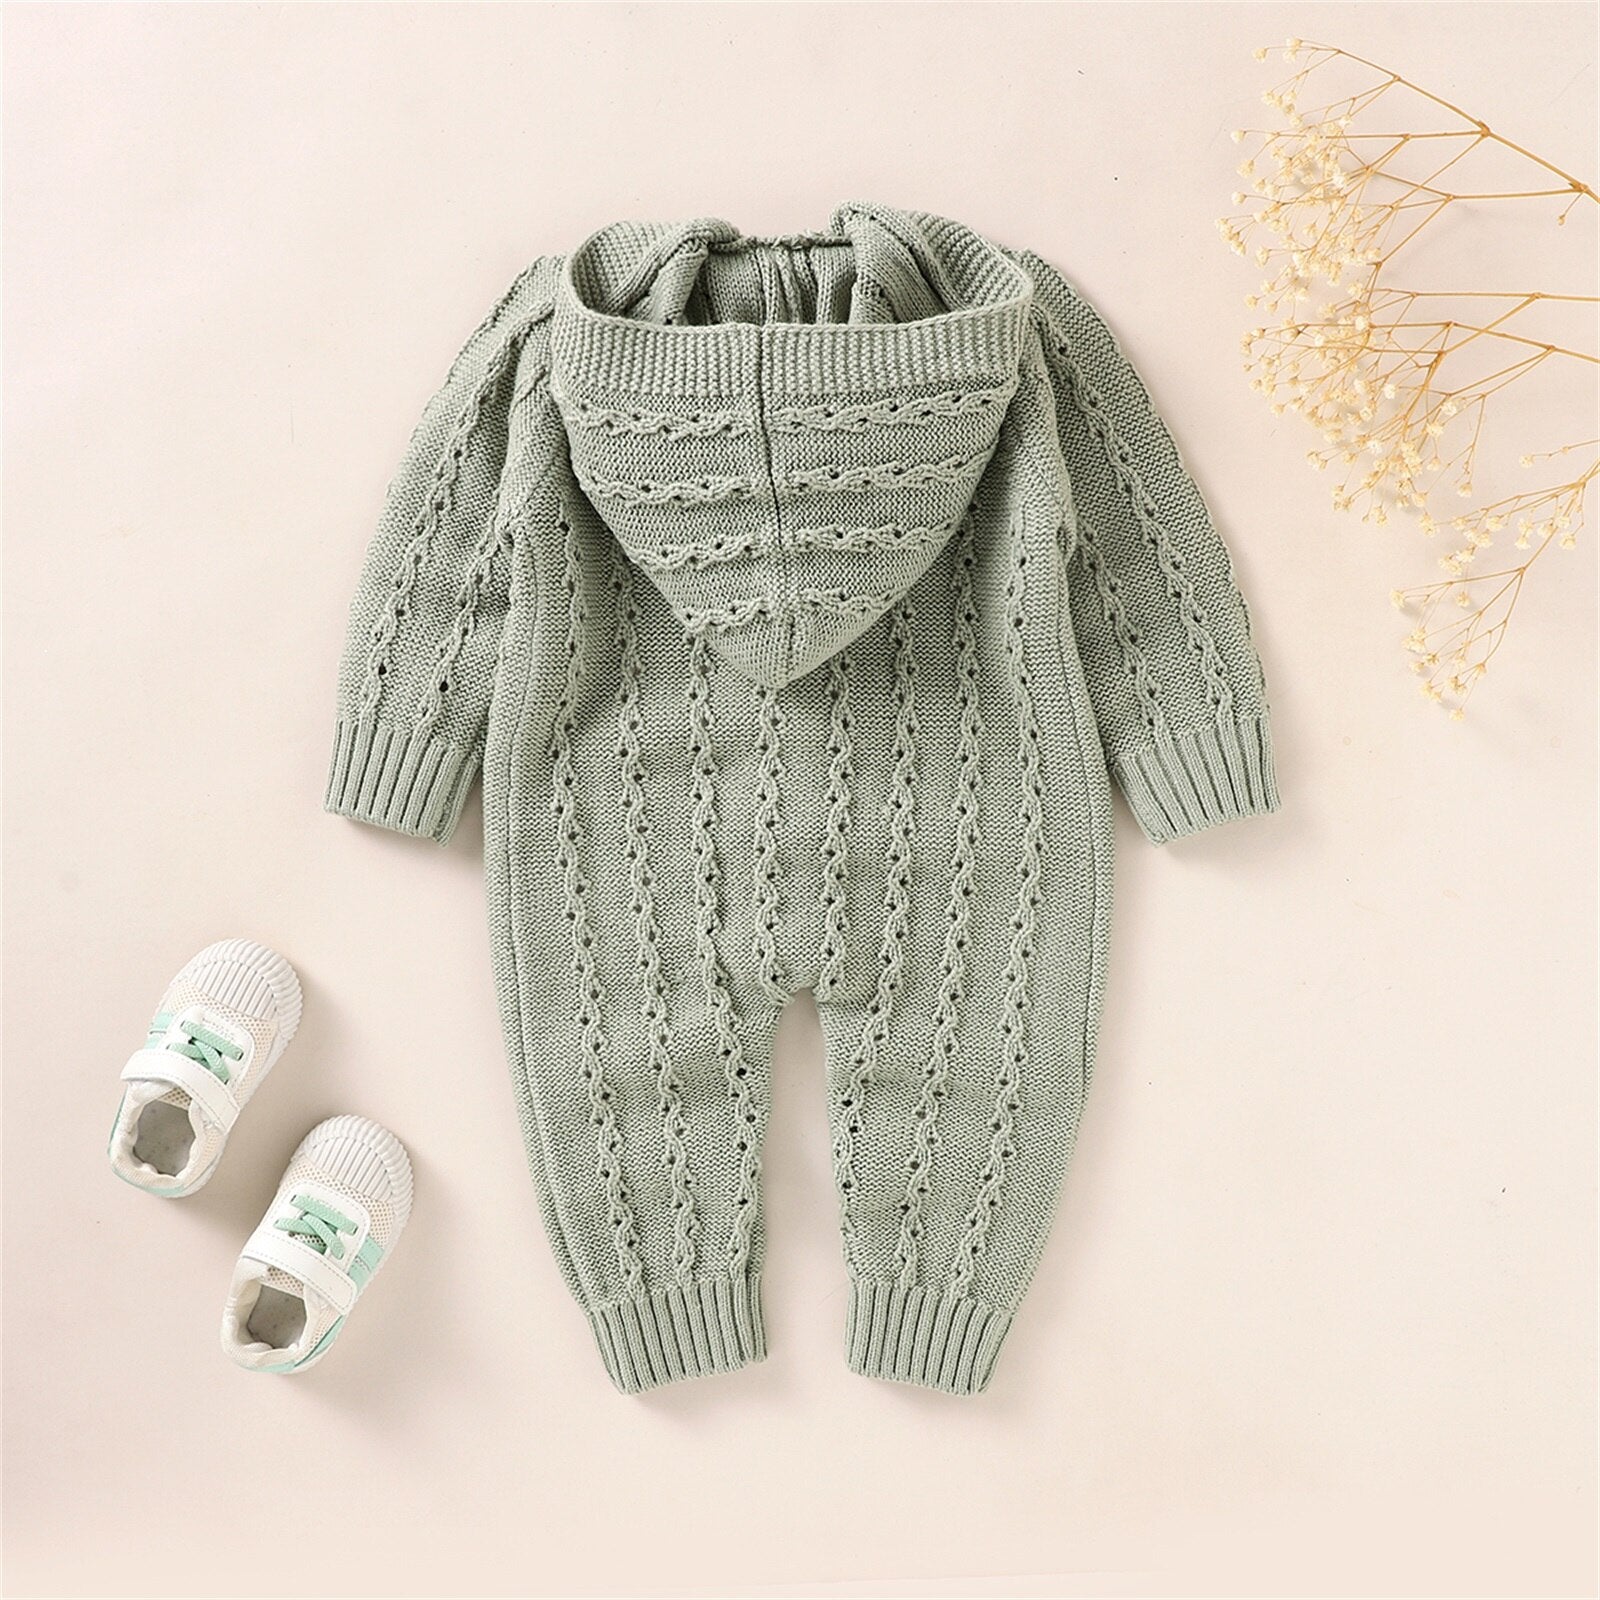 https://hazelandbo.com/cdn/shop/products/Citgeett-Autumn-Solid-Infant-ToddlerBaby-Girls-Boys-Jumpsuit-Knitted-Hooded-Long-Sleeves-Romper-Buttons-Spring-Clothes_0809e939-624f-4891-8057-10f3c4792950_2000x.jpg?v=1629154010